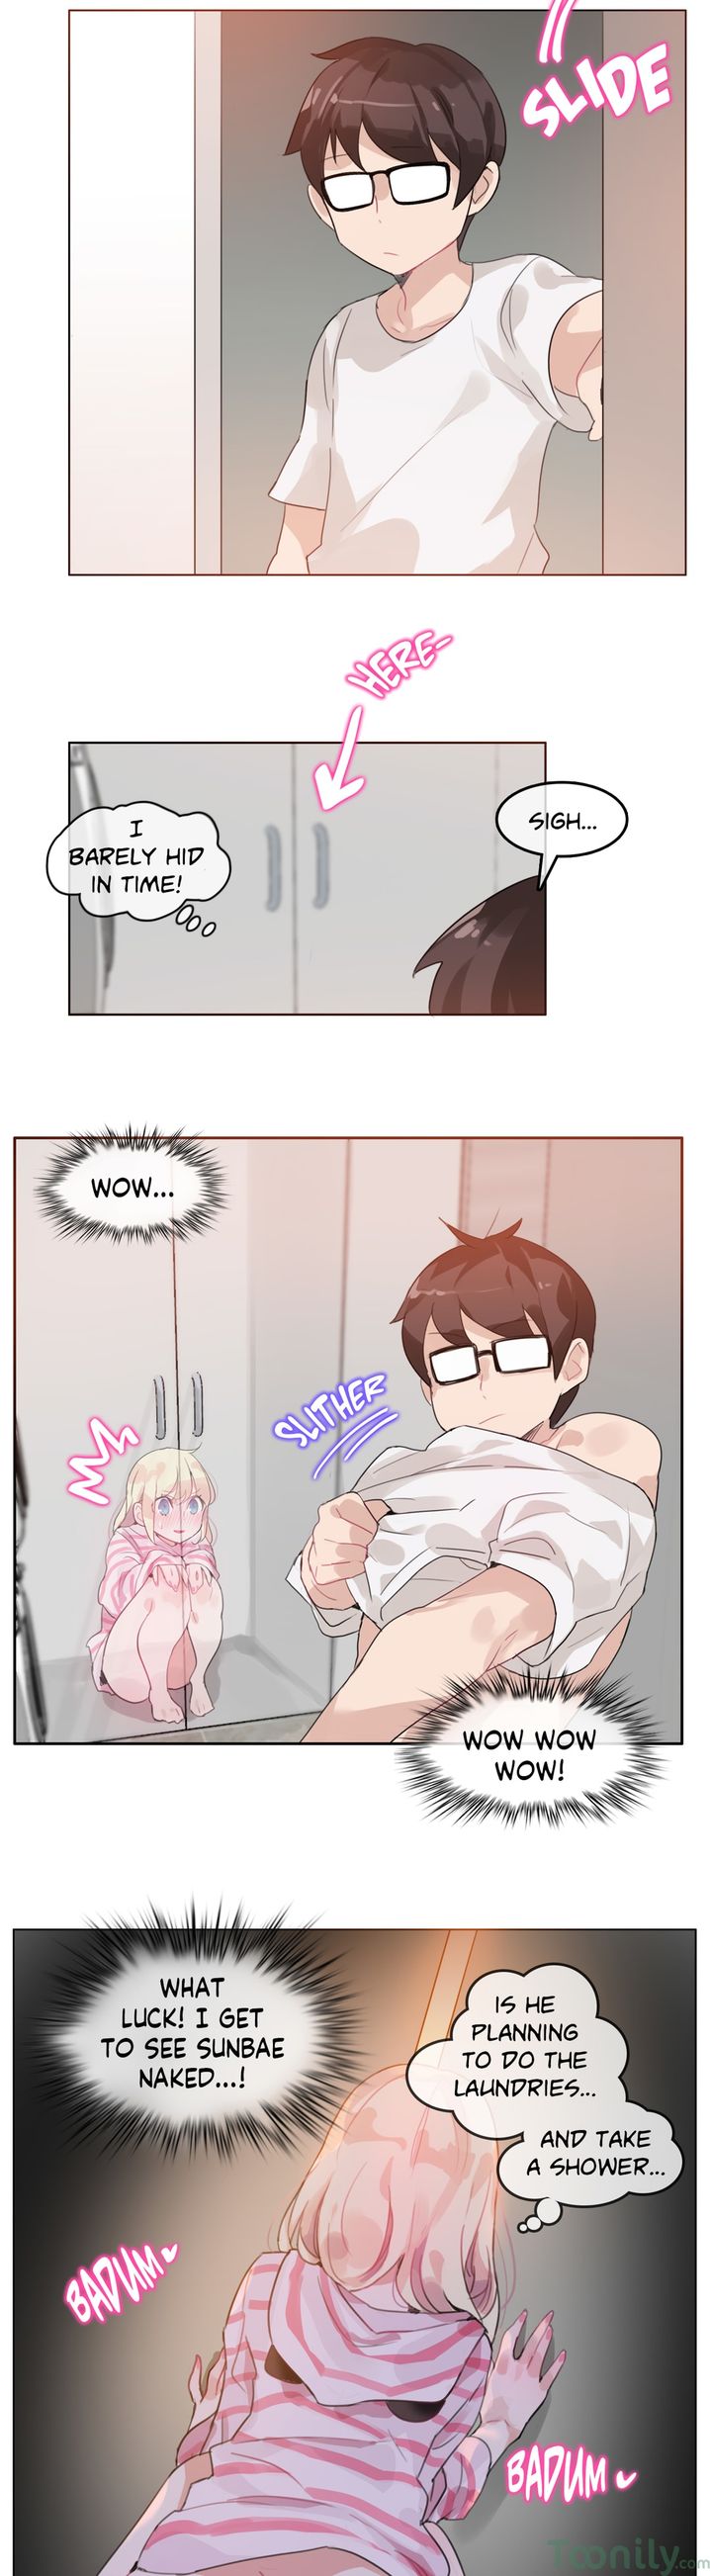 A Pervert’s Daily Life - Chapter 17 Page 9